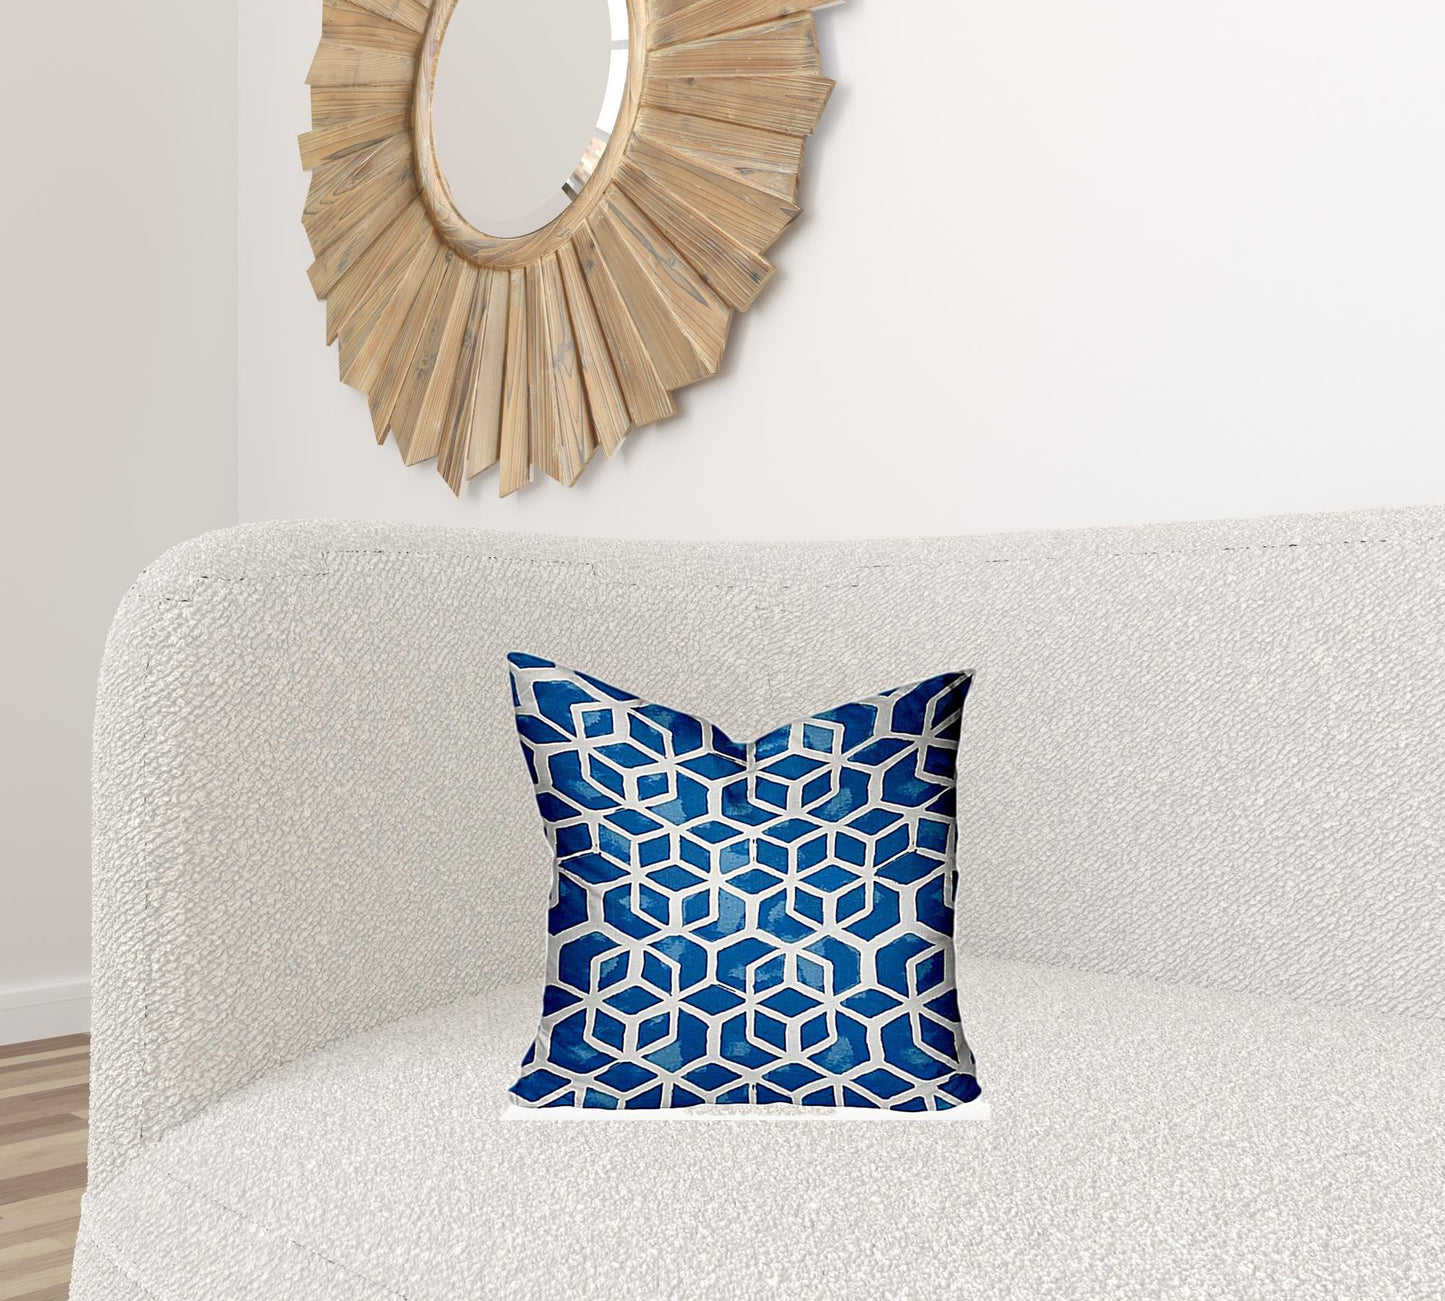 17" X 17" Blue And White Blown Seam Geometric Throw Indoor Outdoor Pillow